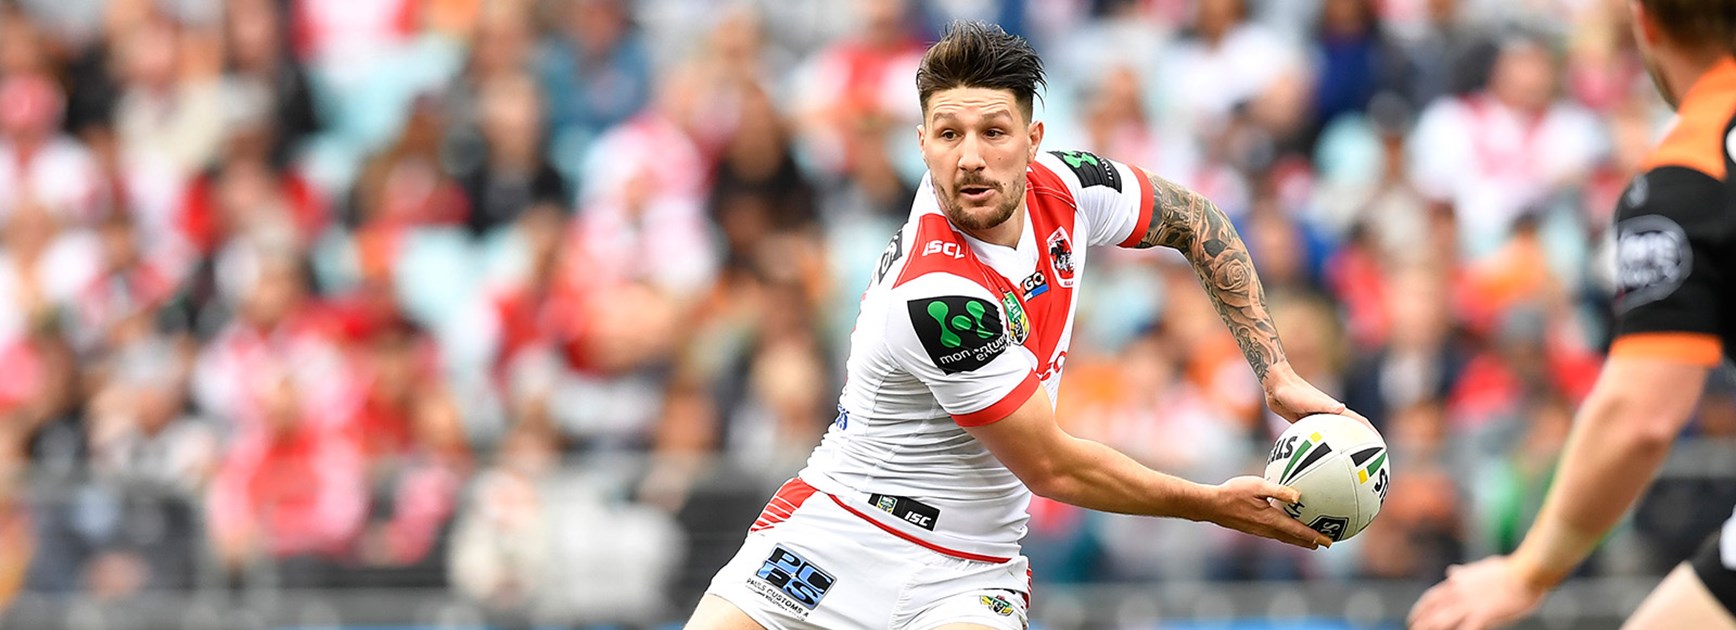 NRL.com's Dally M count: Widdop jumps to second